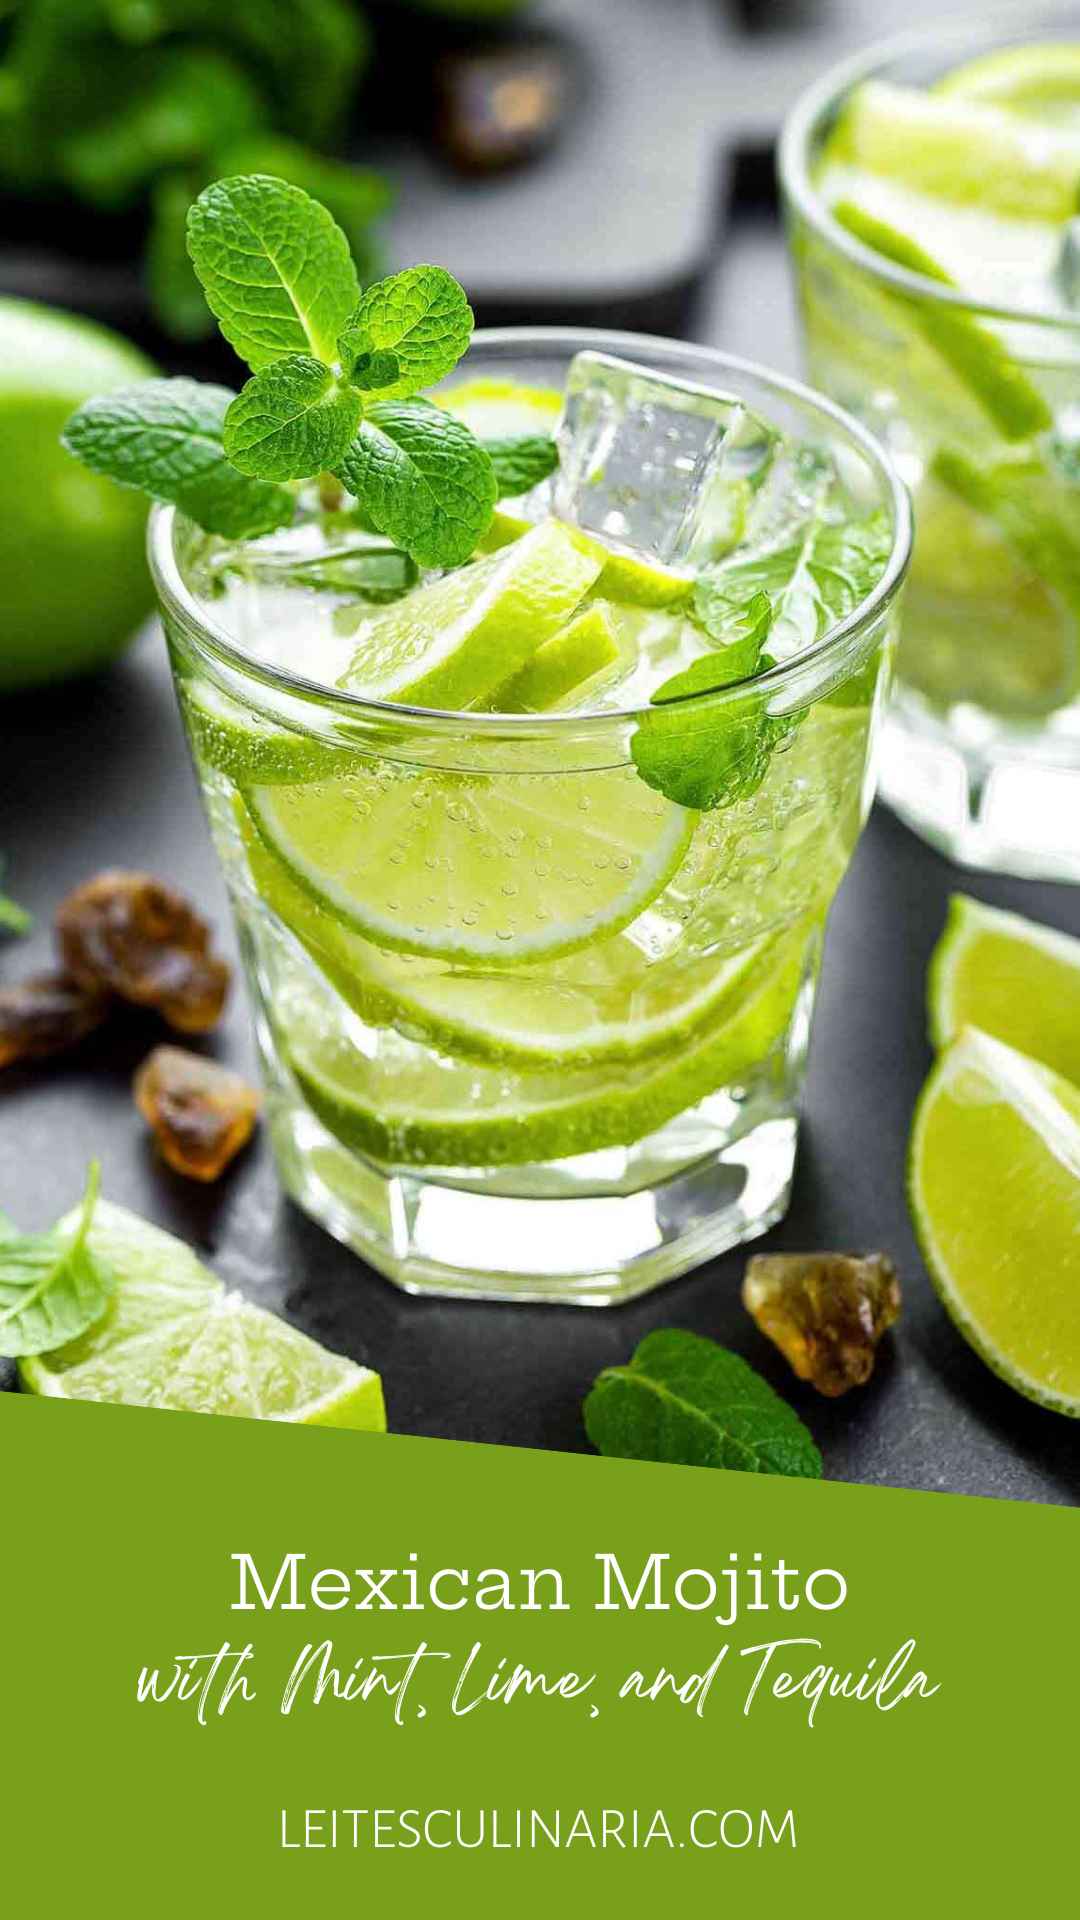 A highball glass filled with Mexican mojito, made with tequila, soda, lime slices, mint sprigs, and ice cubes.